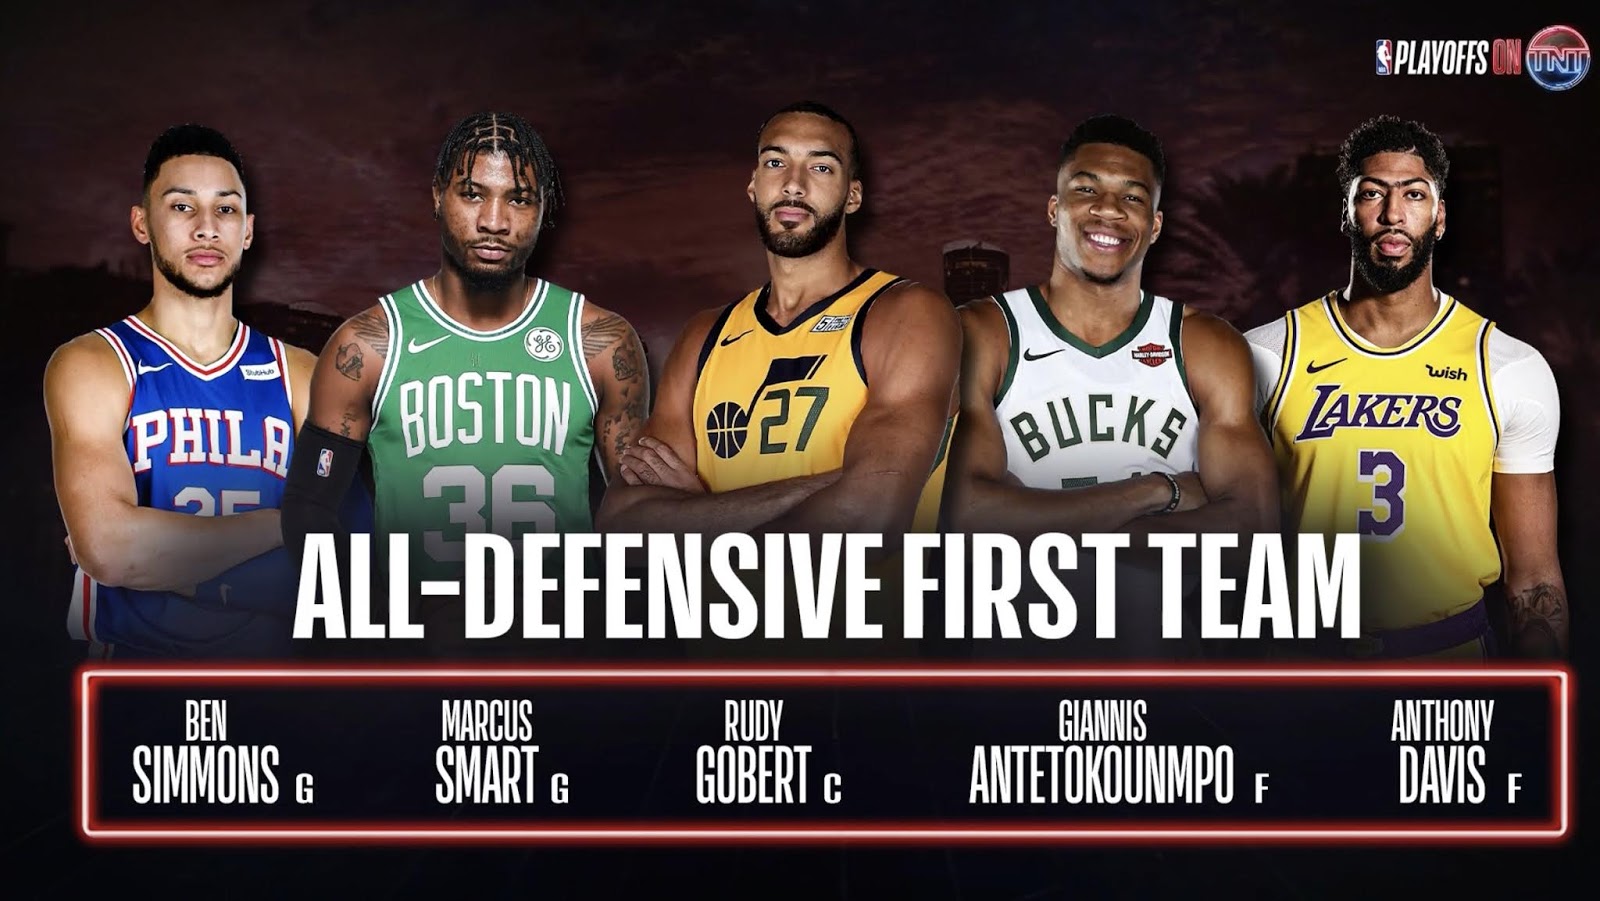 Congrats to Marcus Smart on being named to the 201920 NBA All